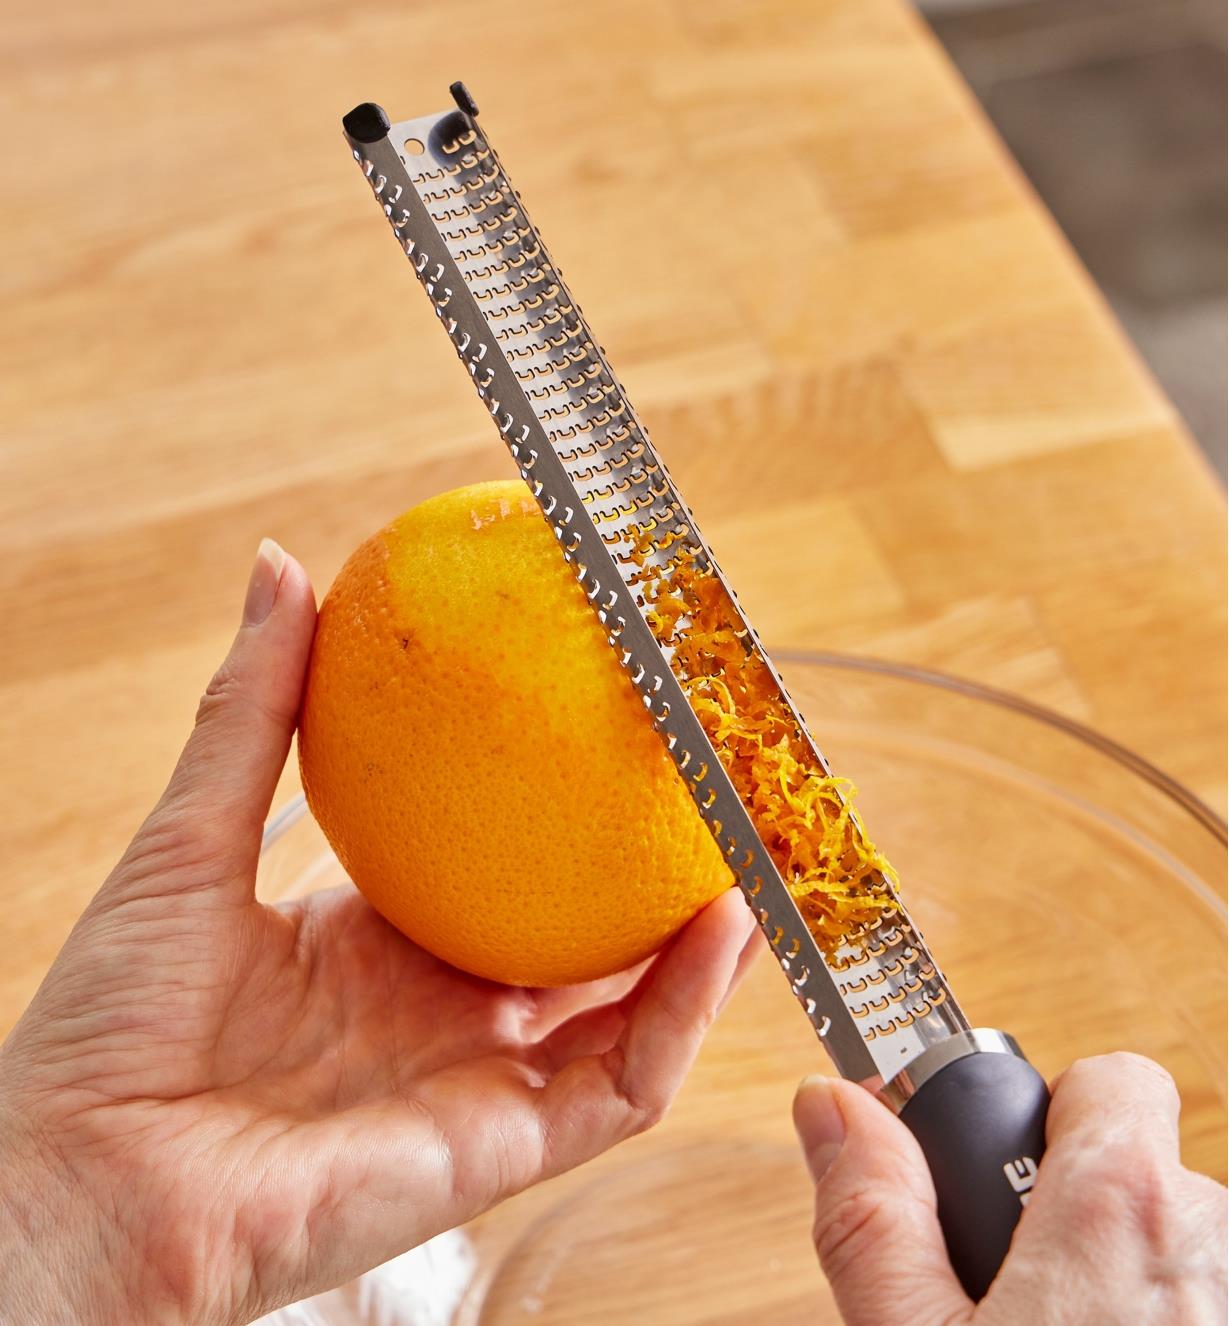 Using a handled stainless-steel rasp to zest an orange